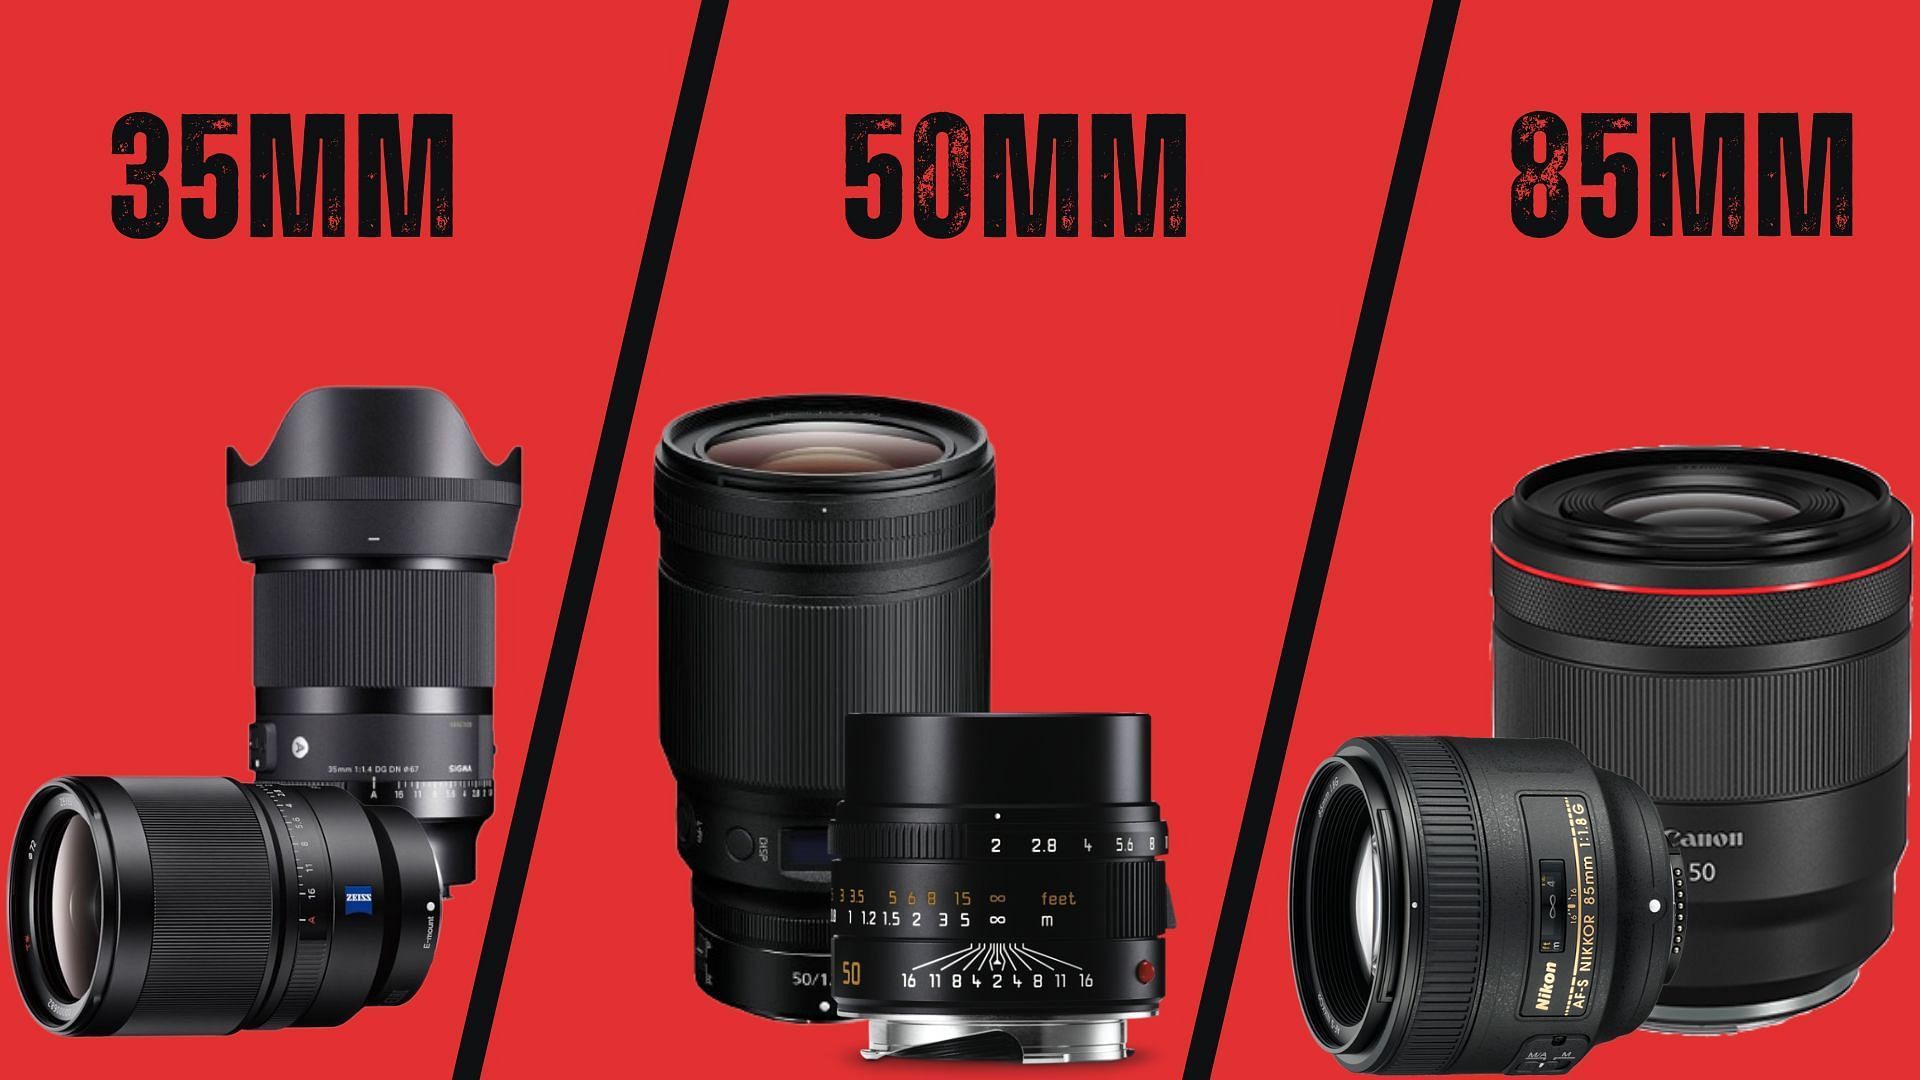 35mm vs 50mm vs 85mm: Which focal length is best for portrait photography? (Image via Sigma, Canon, Fujifilm, Sony, Nikon, Leica)